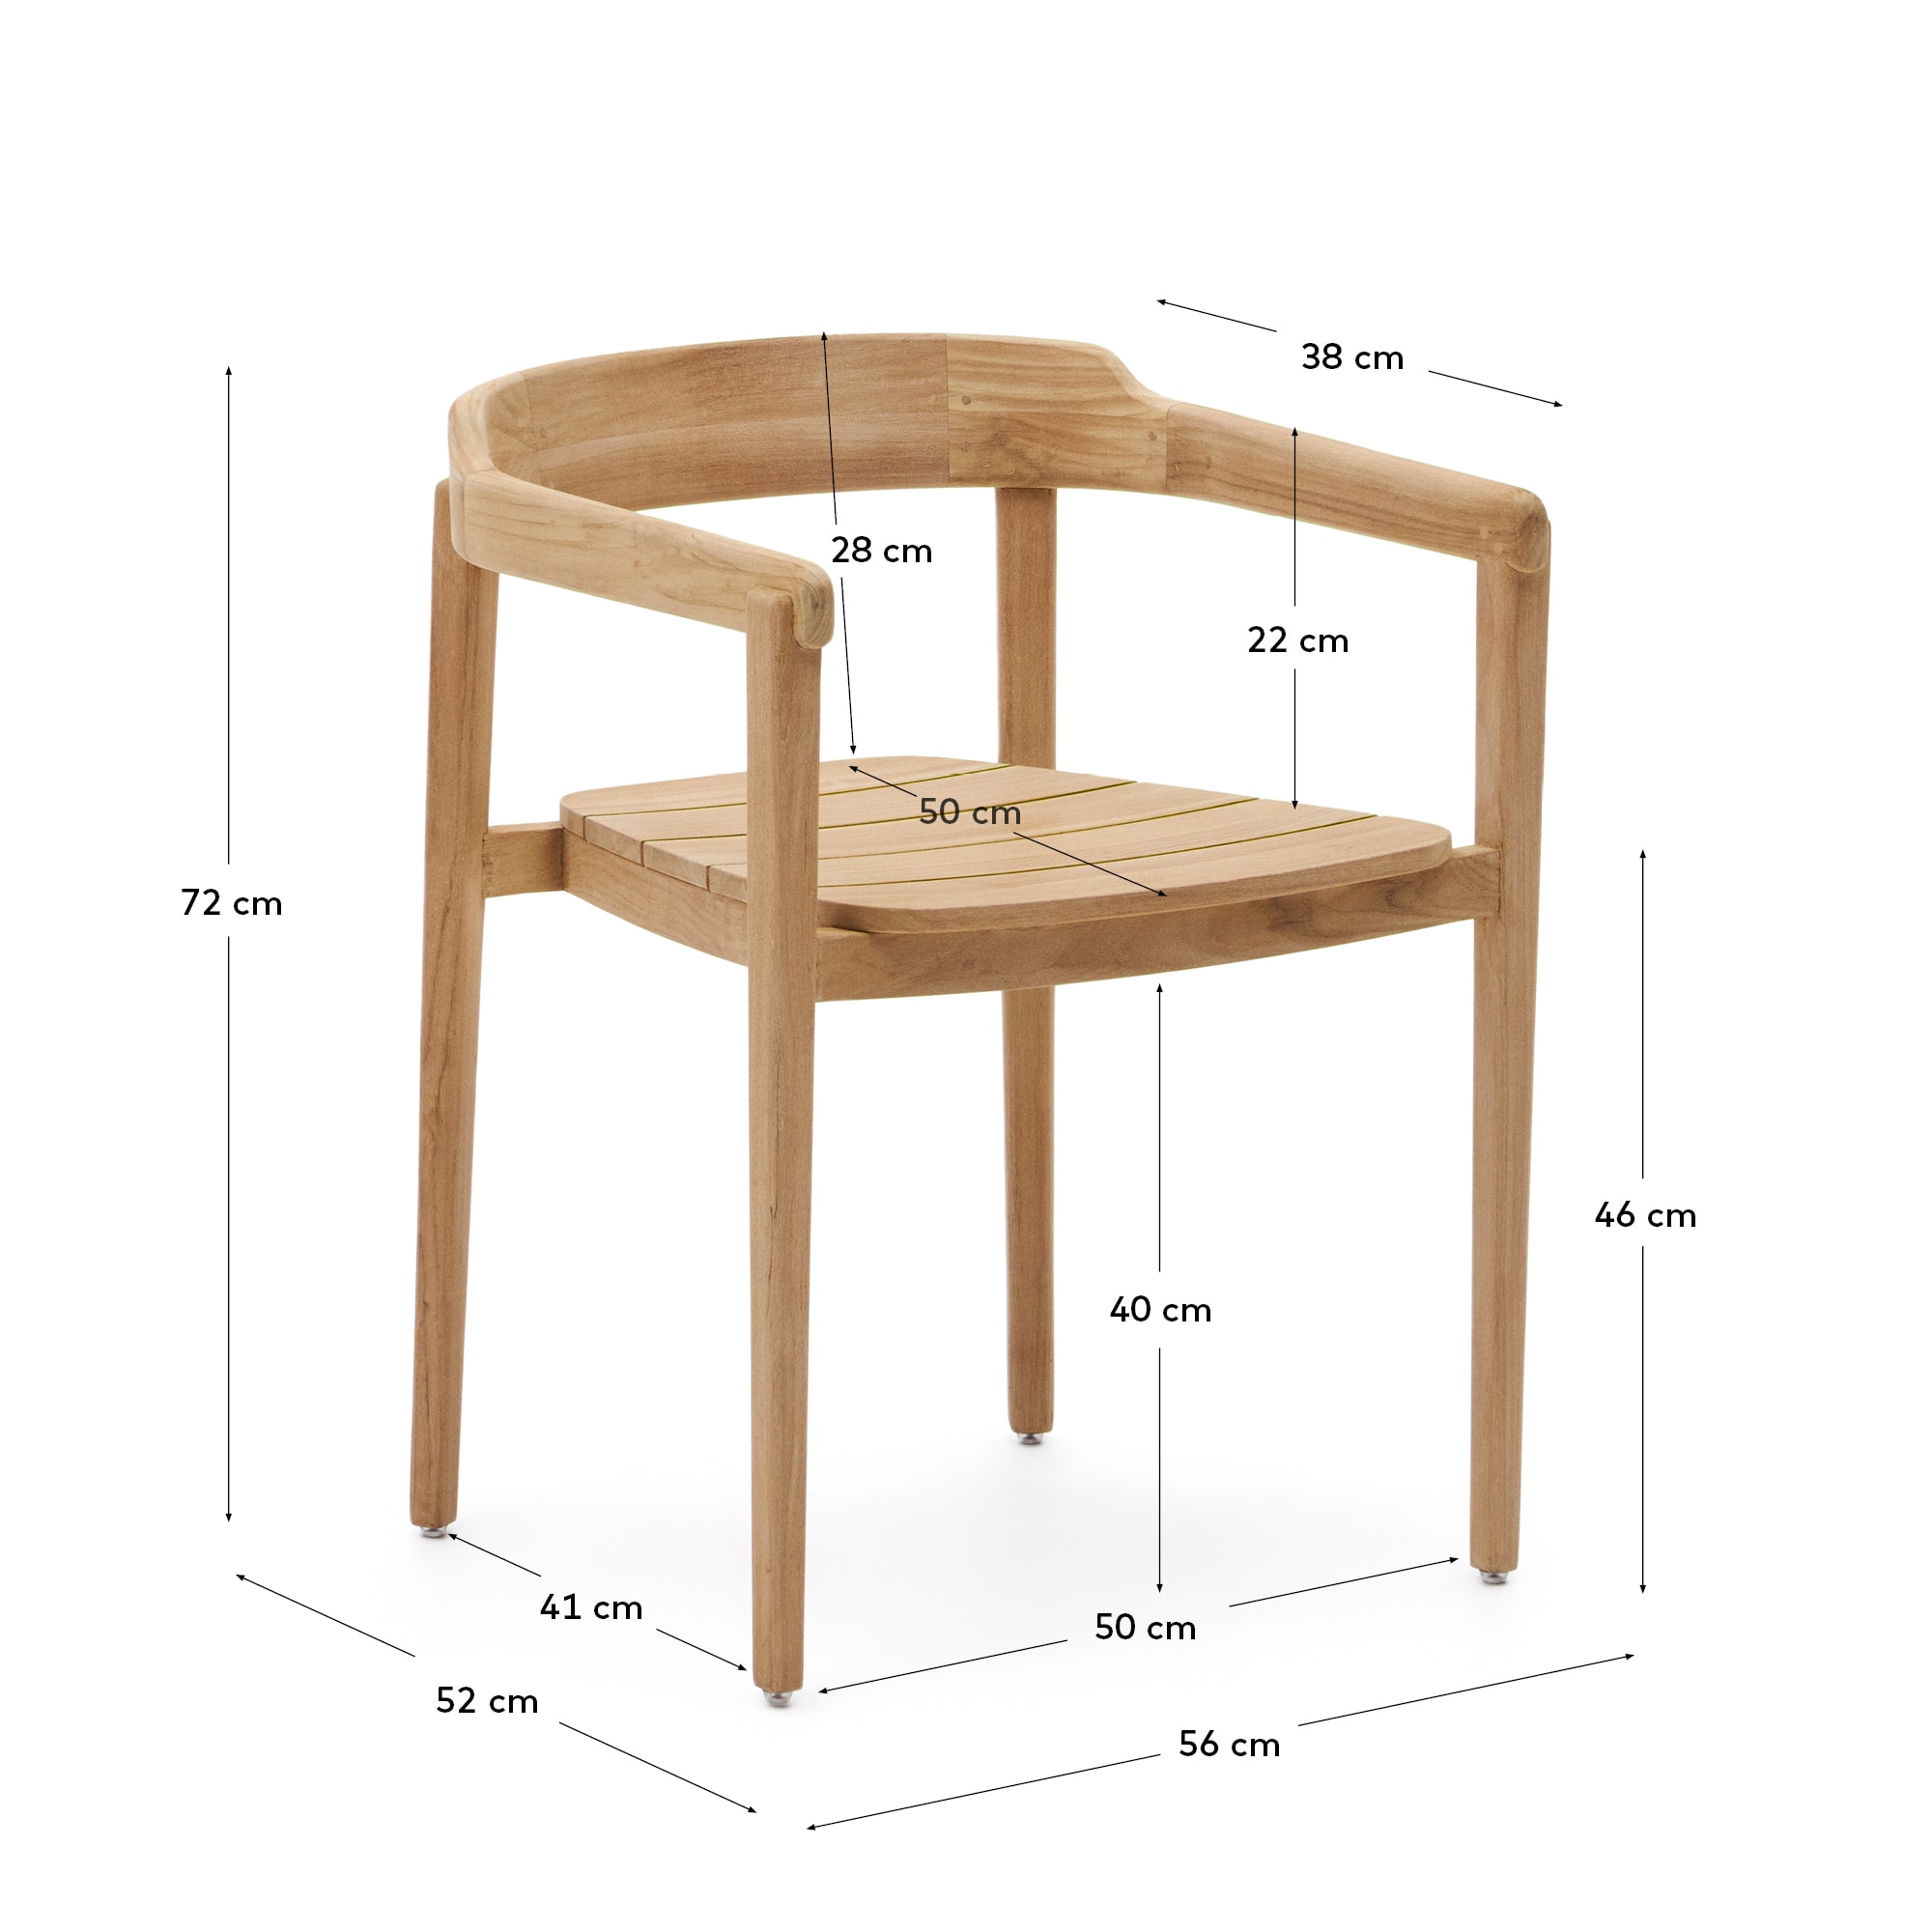 Icaro stackable solid teak wood chair in a natural finish, 100% FSC - 크기